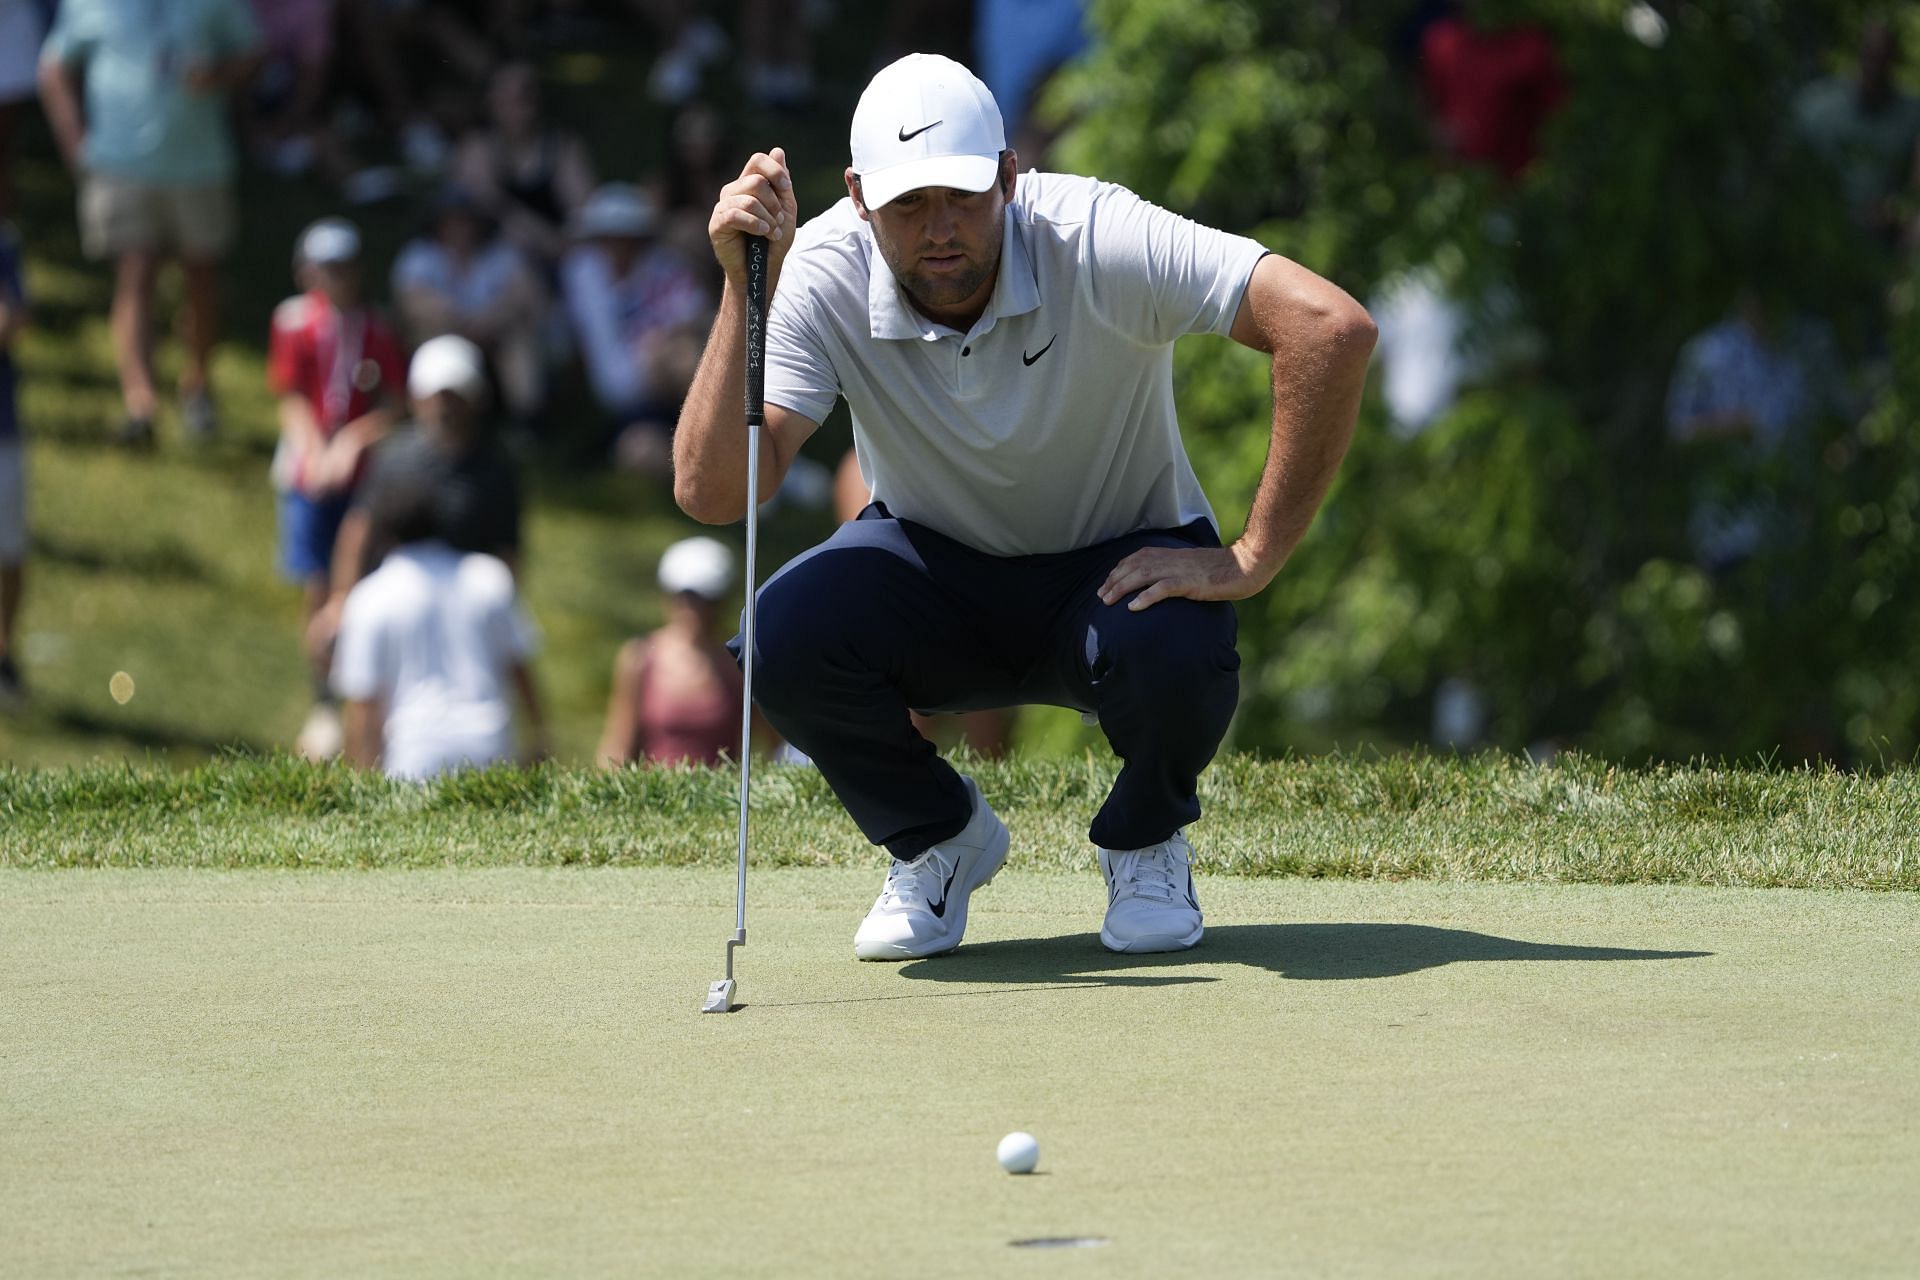 Scheffler getting ready for a putt at the 2023 Memorial Tournament. (Image via Getty).